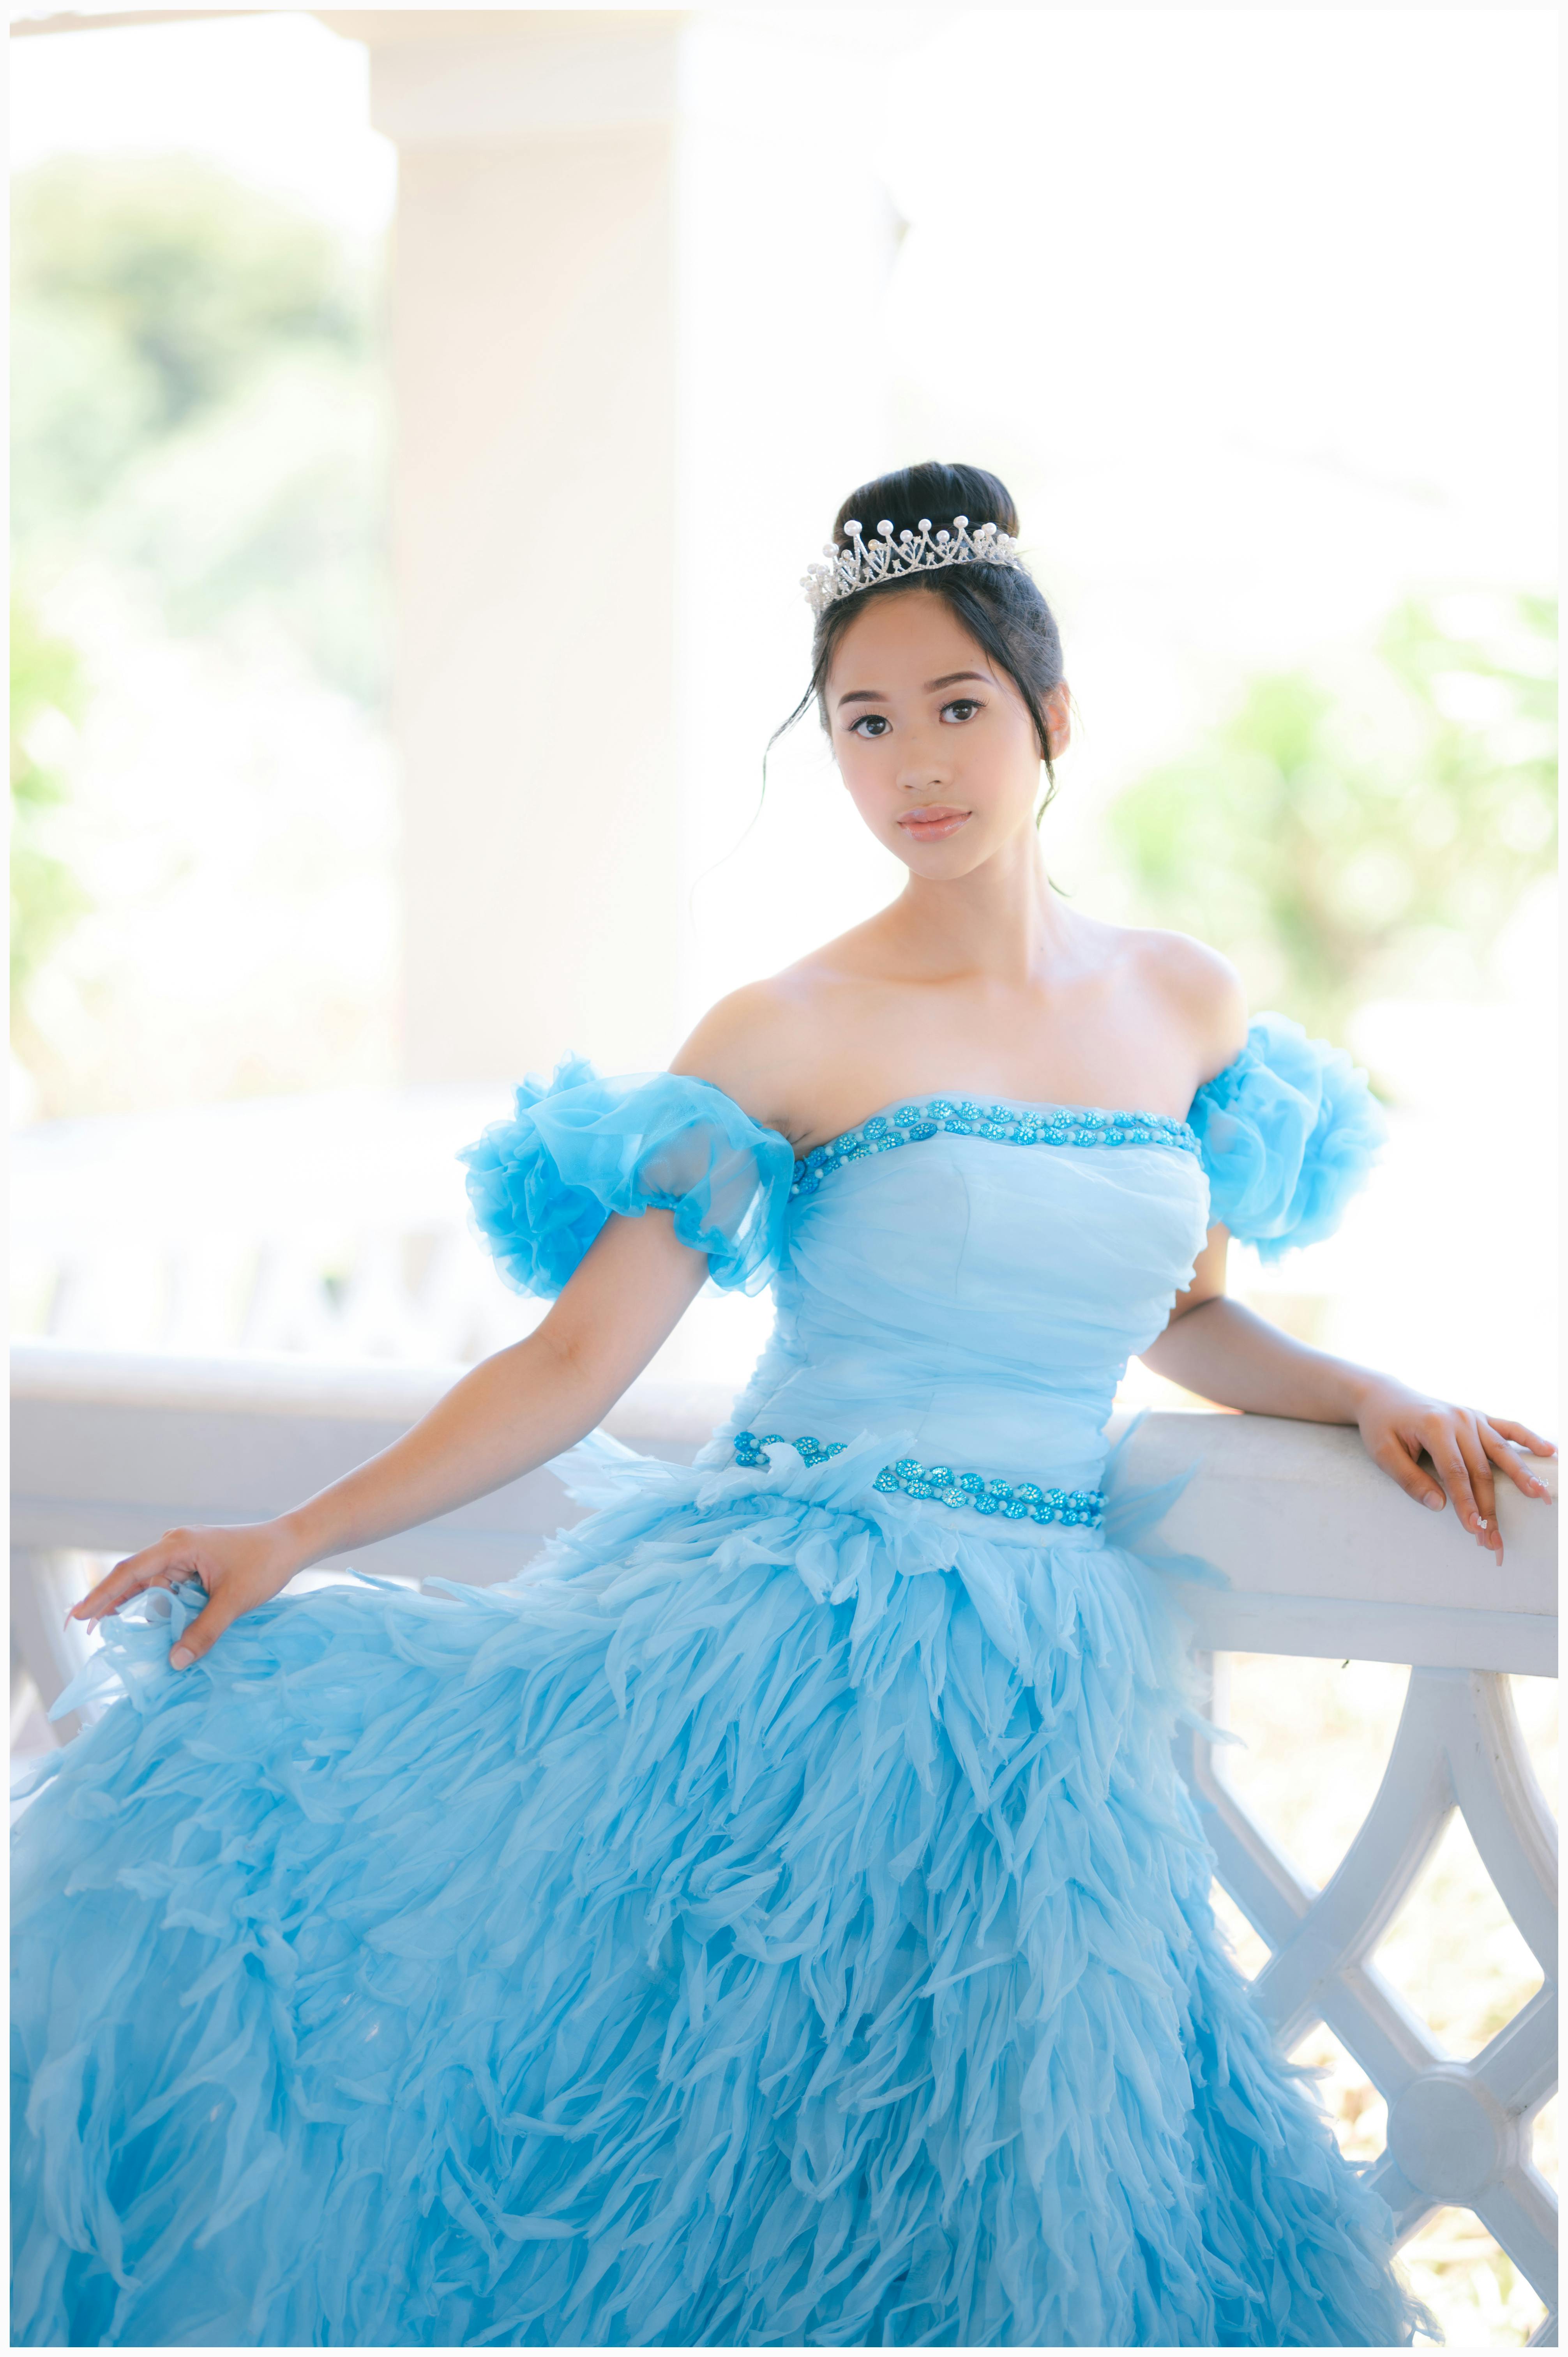 beautiful young girl wearing a tiara and a tulle dress